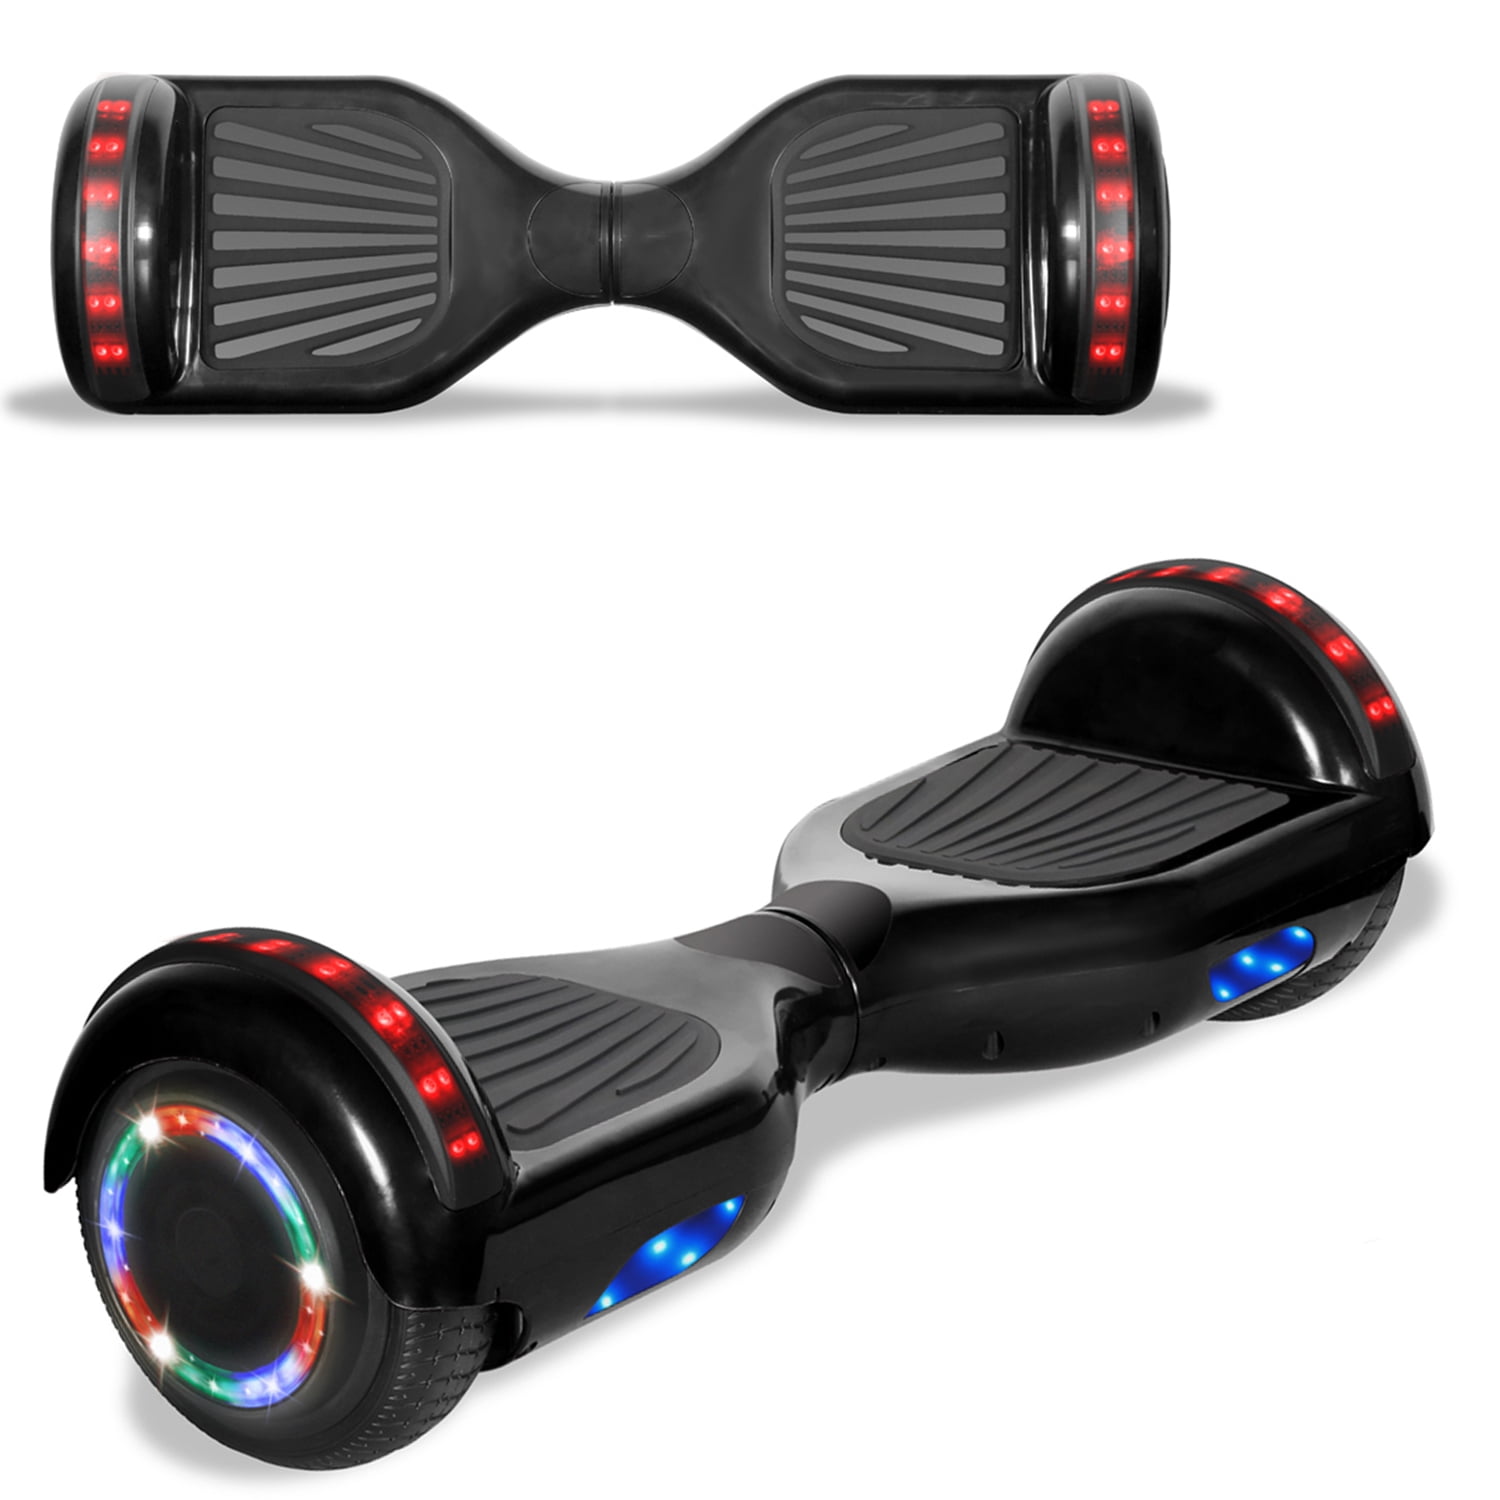 Electric Hoverboard Smart Self Balancing Scooter HOVER BOARD UL2272 Certified 